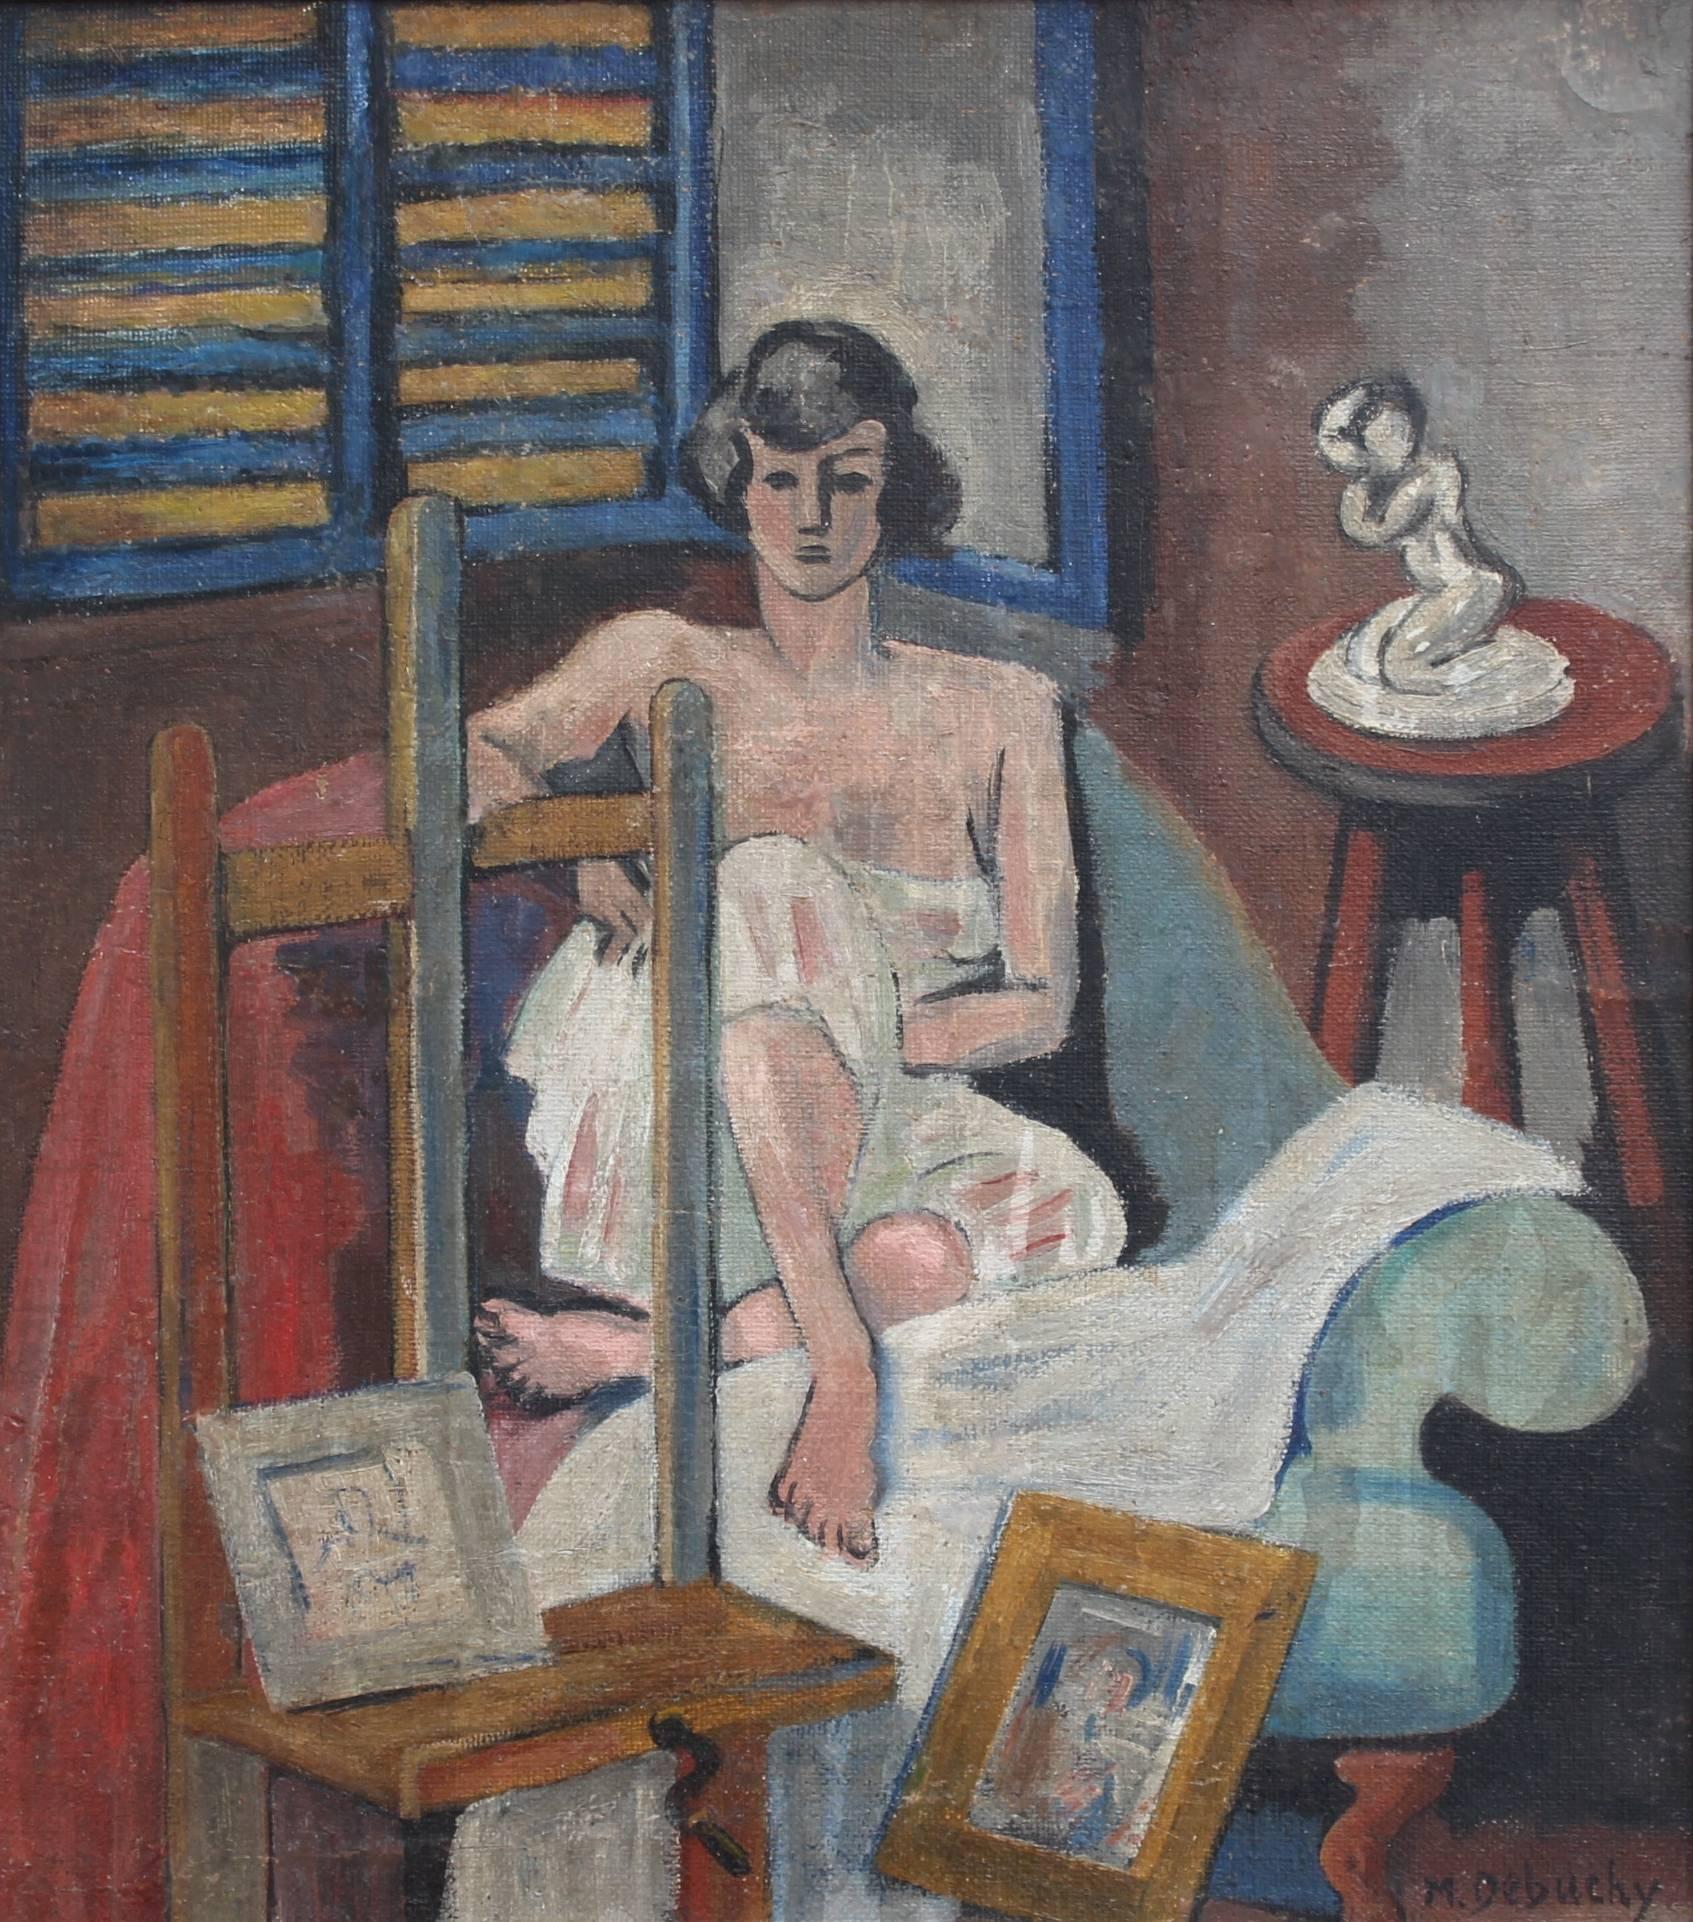 Unknown Portrait Painting - 'Seated Woman' by M. Debuchy, Modern Portrait Oil Painting, circa 1930s